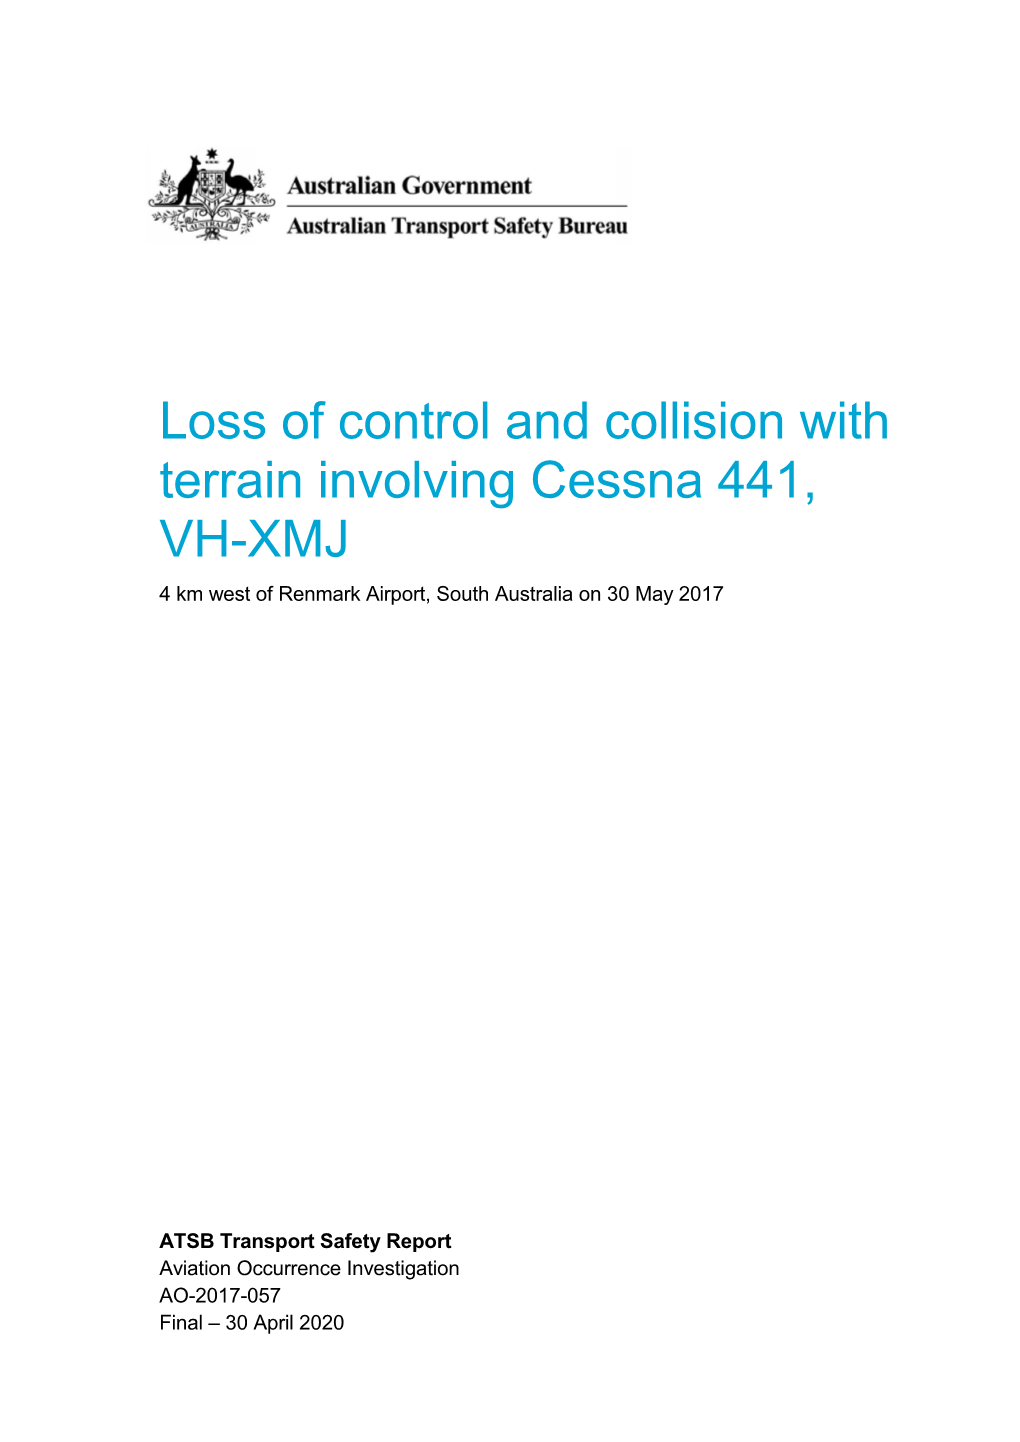 Loss of Control and Collision with Terrain Involving Cessna 441, VH-XMJ 4 Km West of Renmark Airport, South Australia on 30 May 2017